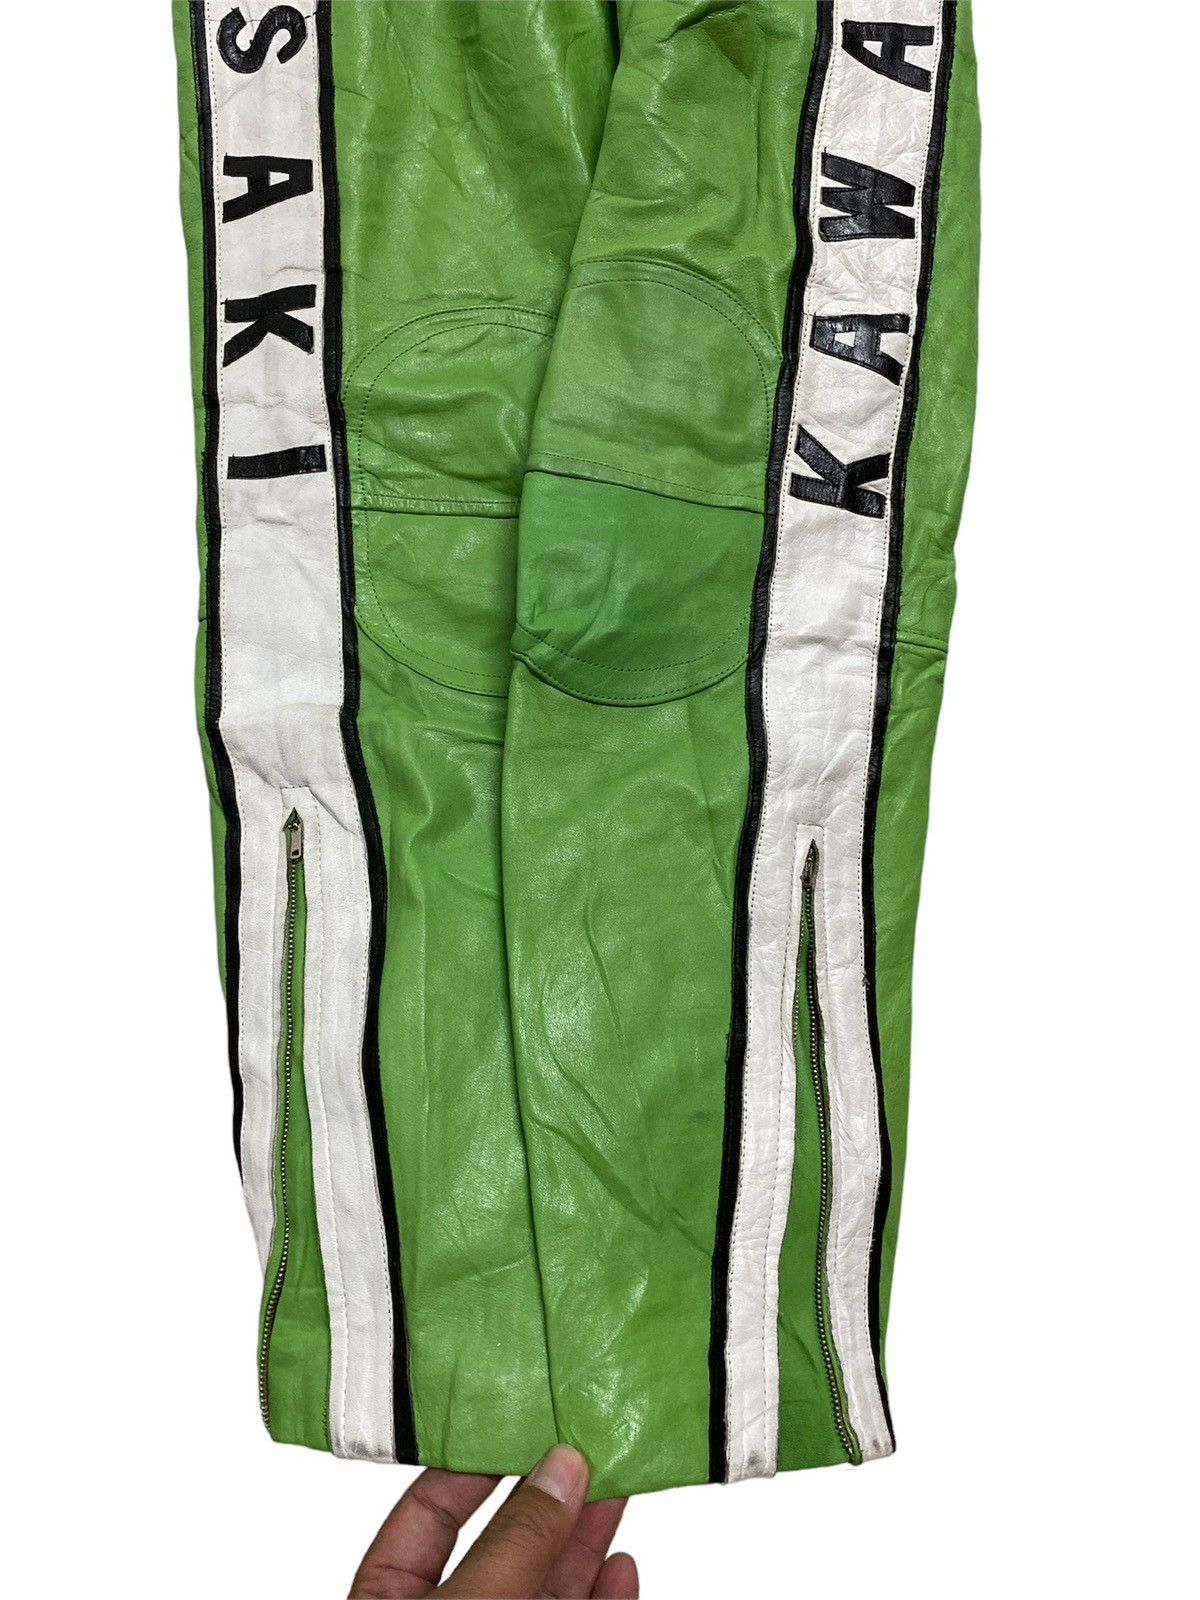 Sports Specialties - KAWASAKI Leather Racing Suit Overall - 7